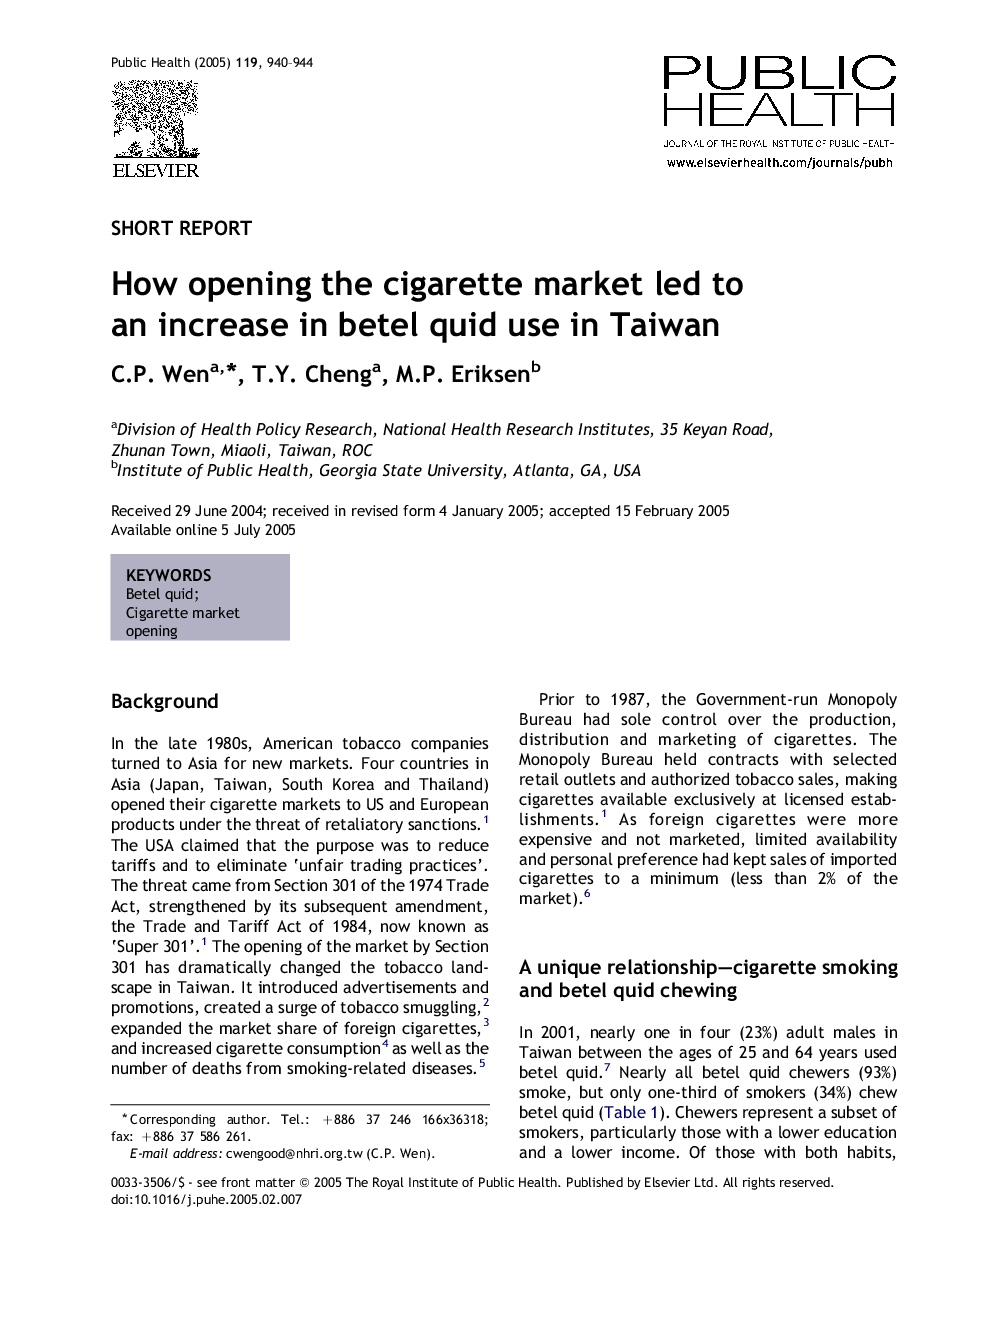 How opening the cigarette market led to an increase in betel quid use in Taiwan